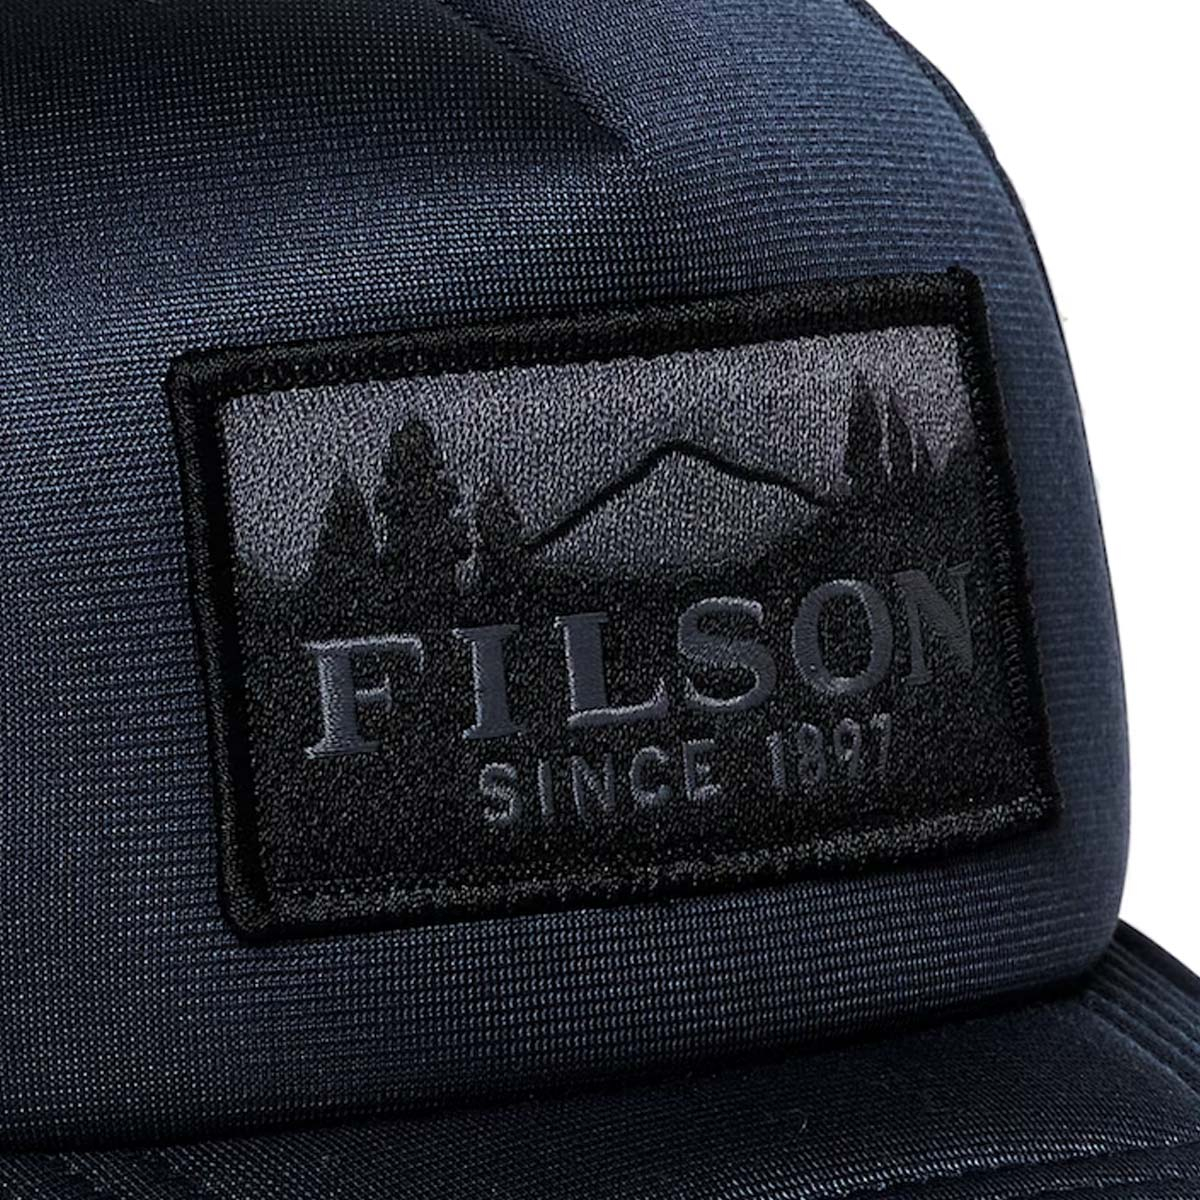 Filson Mesh Harvester Cap Navy/Scenic, durable cap with breathable sun protection